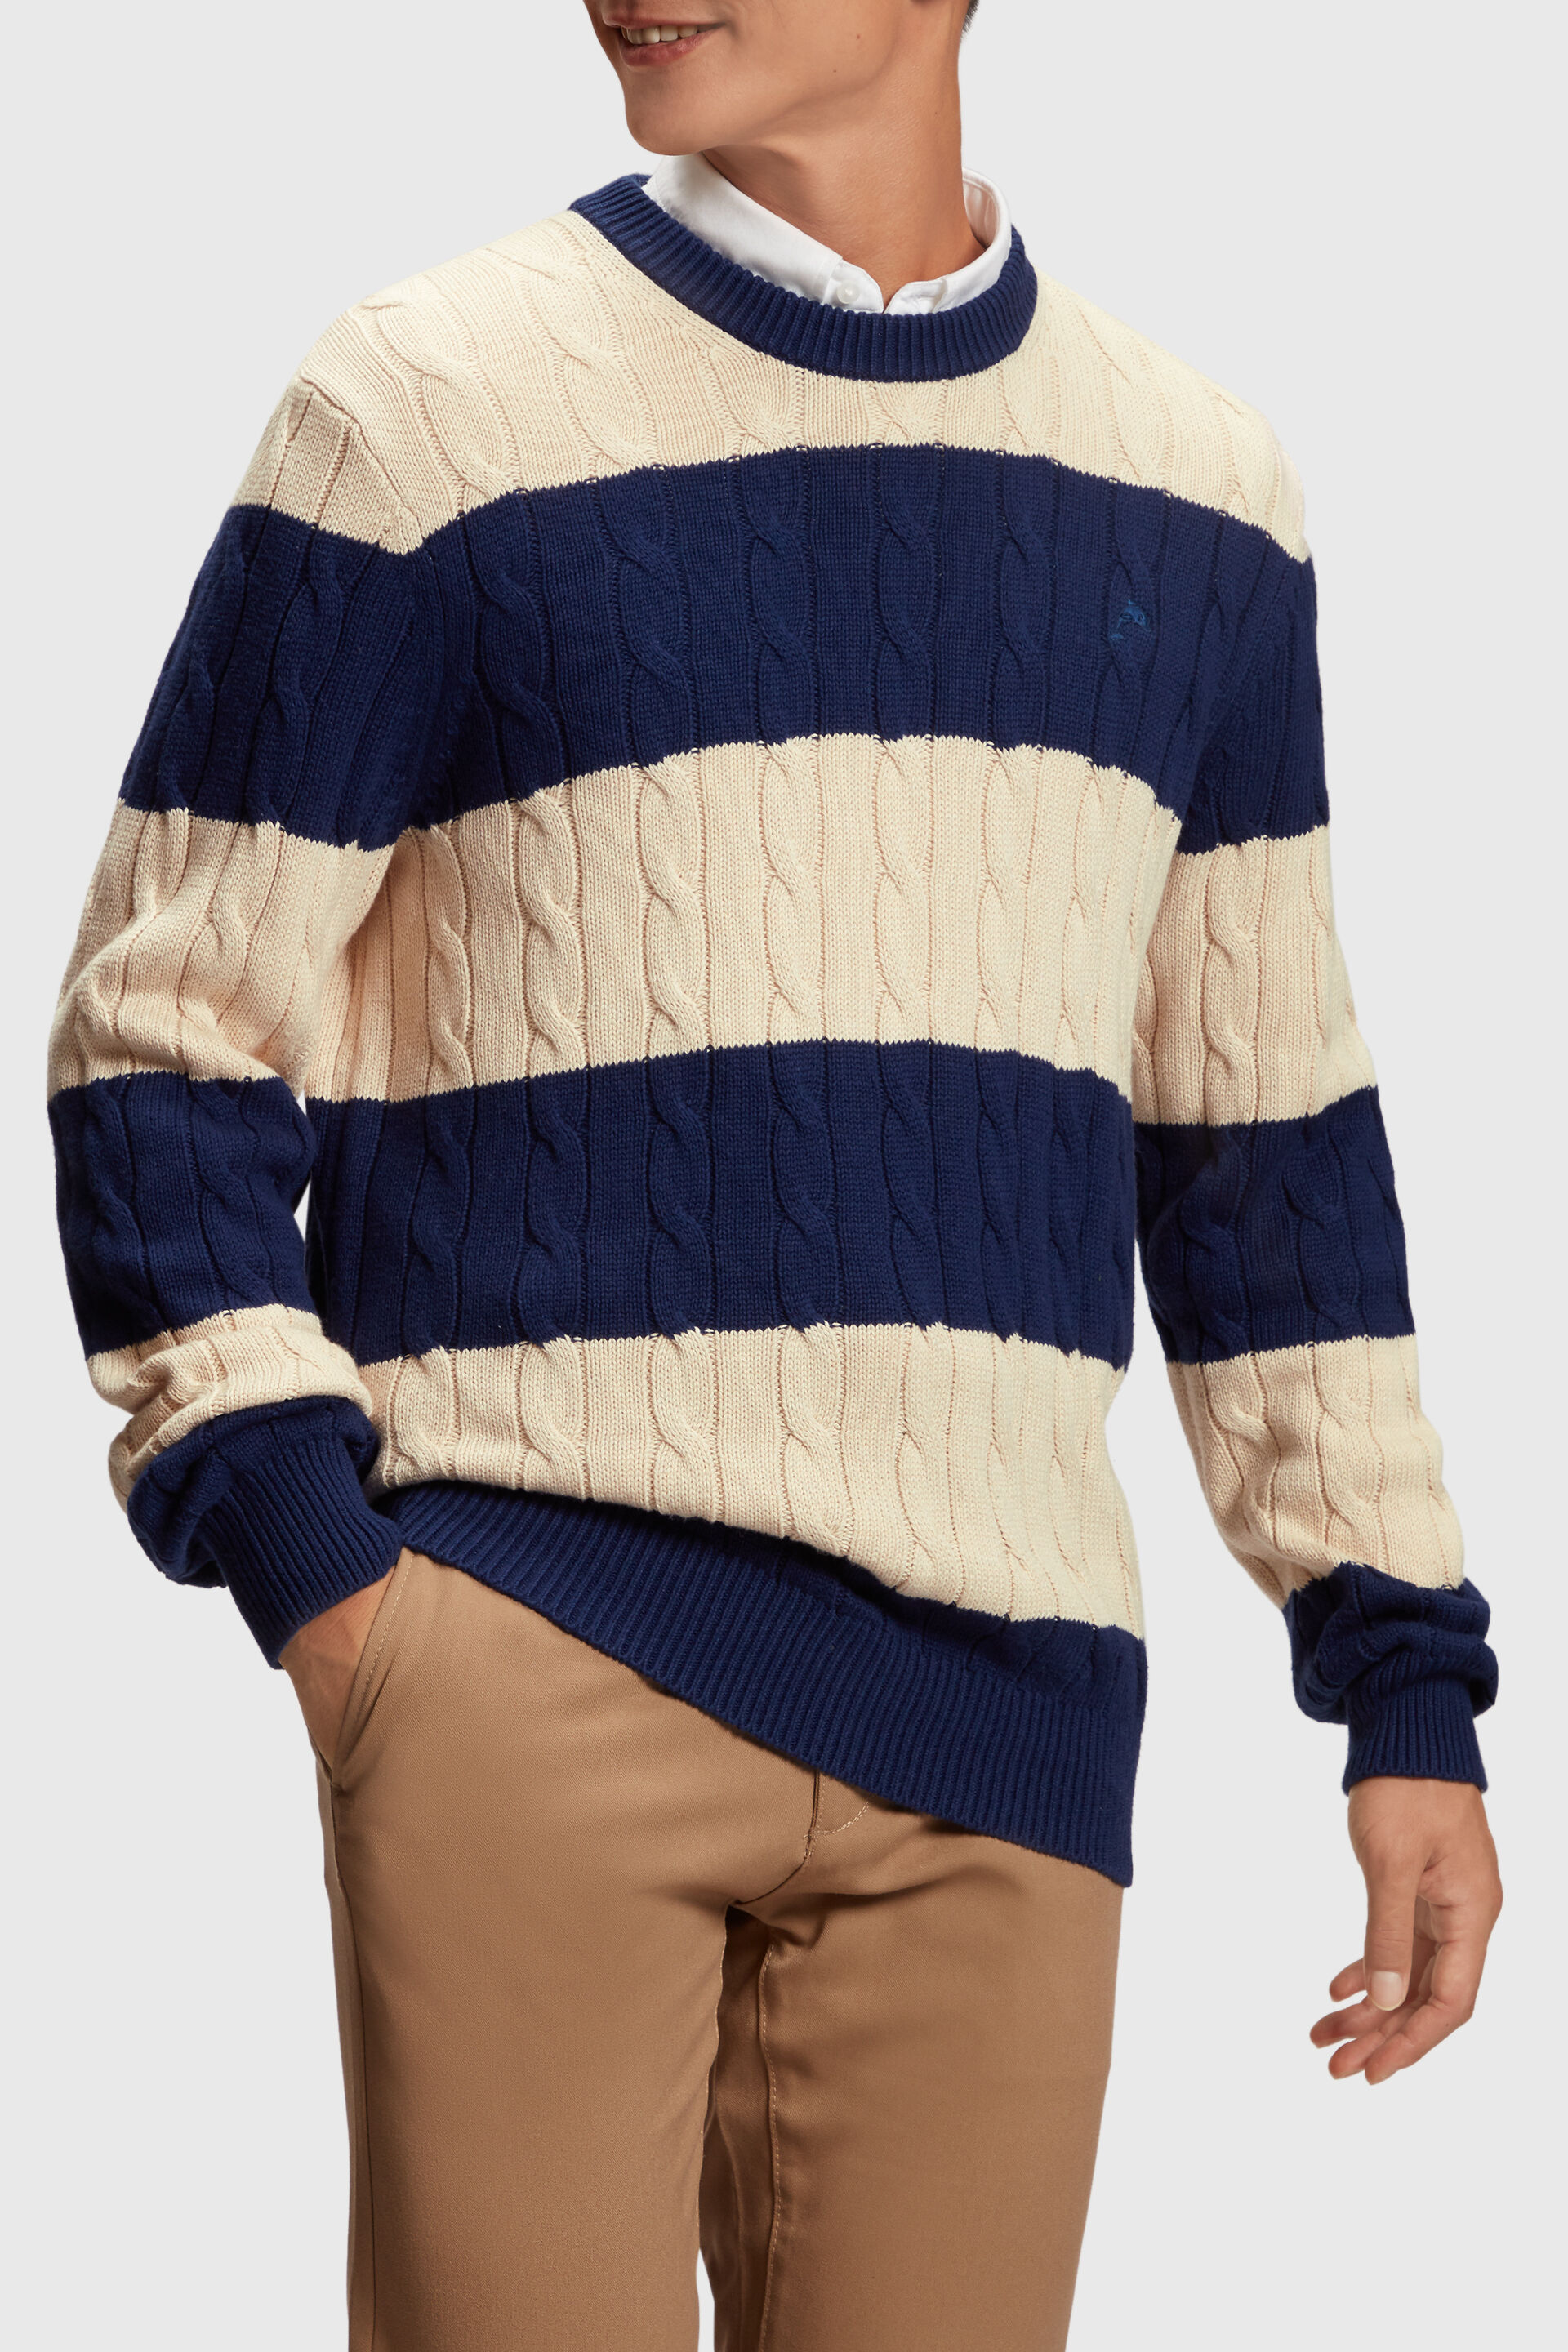 Esprit cable Striped sweater knit